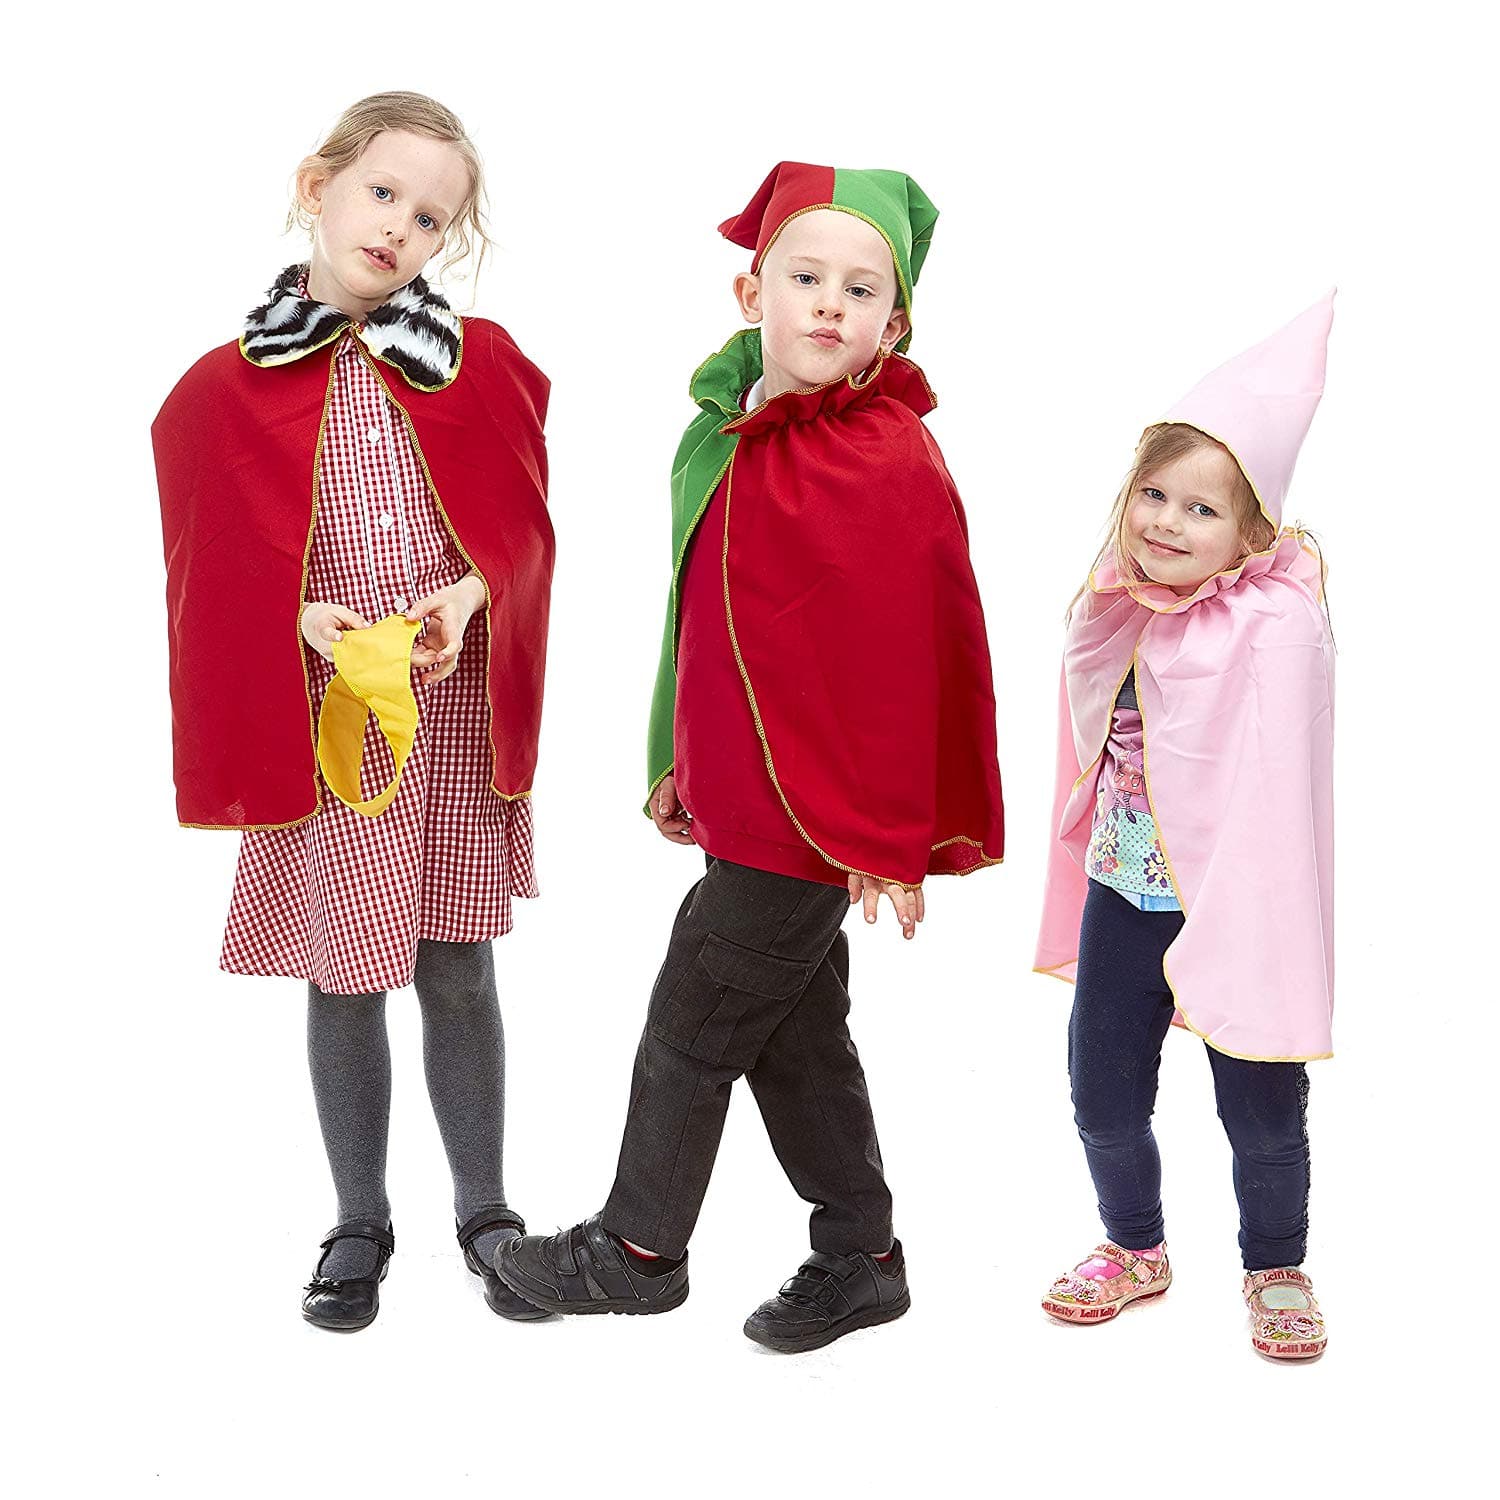 Heroes Dressing up Cloaks Set of 5, Introducing the Heroes Dressing up Cloaks Set of 5, the perfect addition to any child's dress-up collection! These high-quality cloaks are designed to fit any size child, providing endless hours of imaginative play in both the classroom and on the stage during school plays. One of the standout features of these versatile cloaks is their ability to transform children into an array of characters. Whether they want to be a mischievous Jester, a powerful King or Queen, a wise